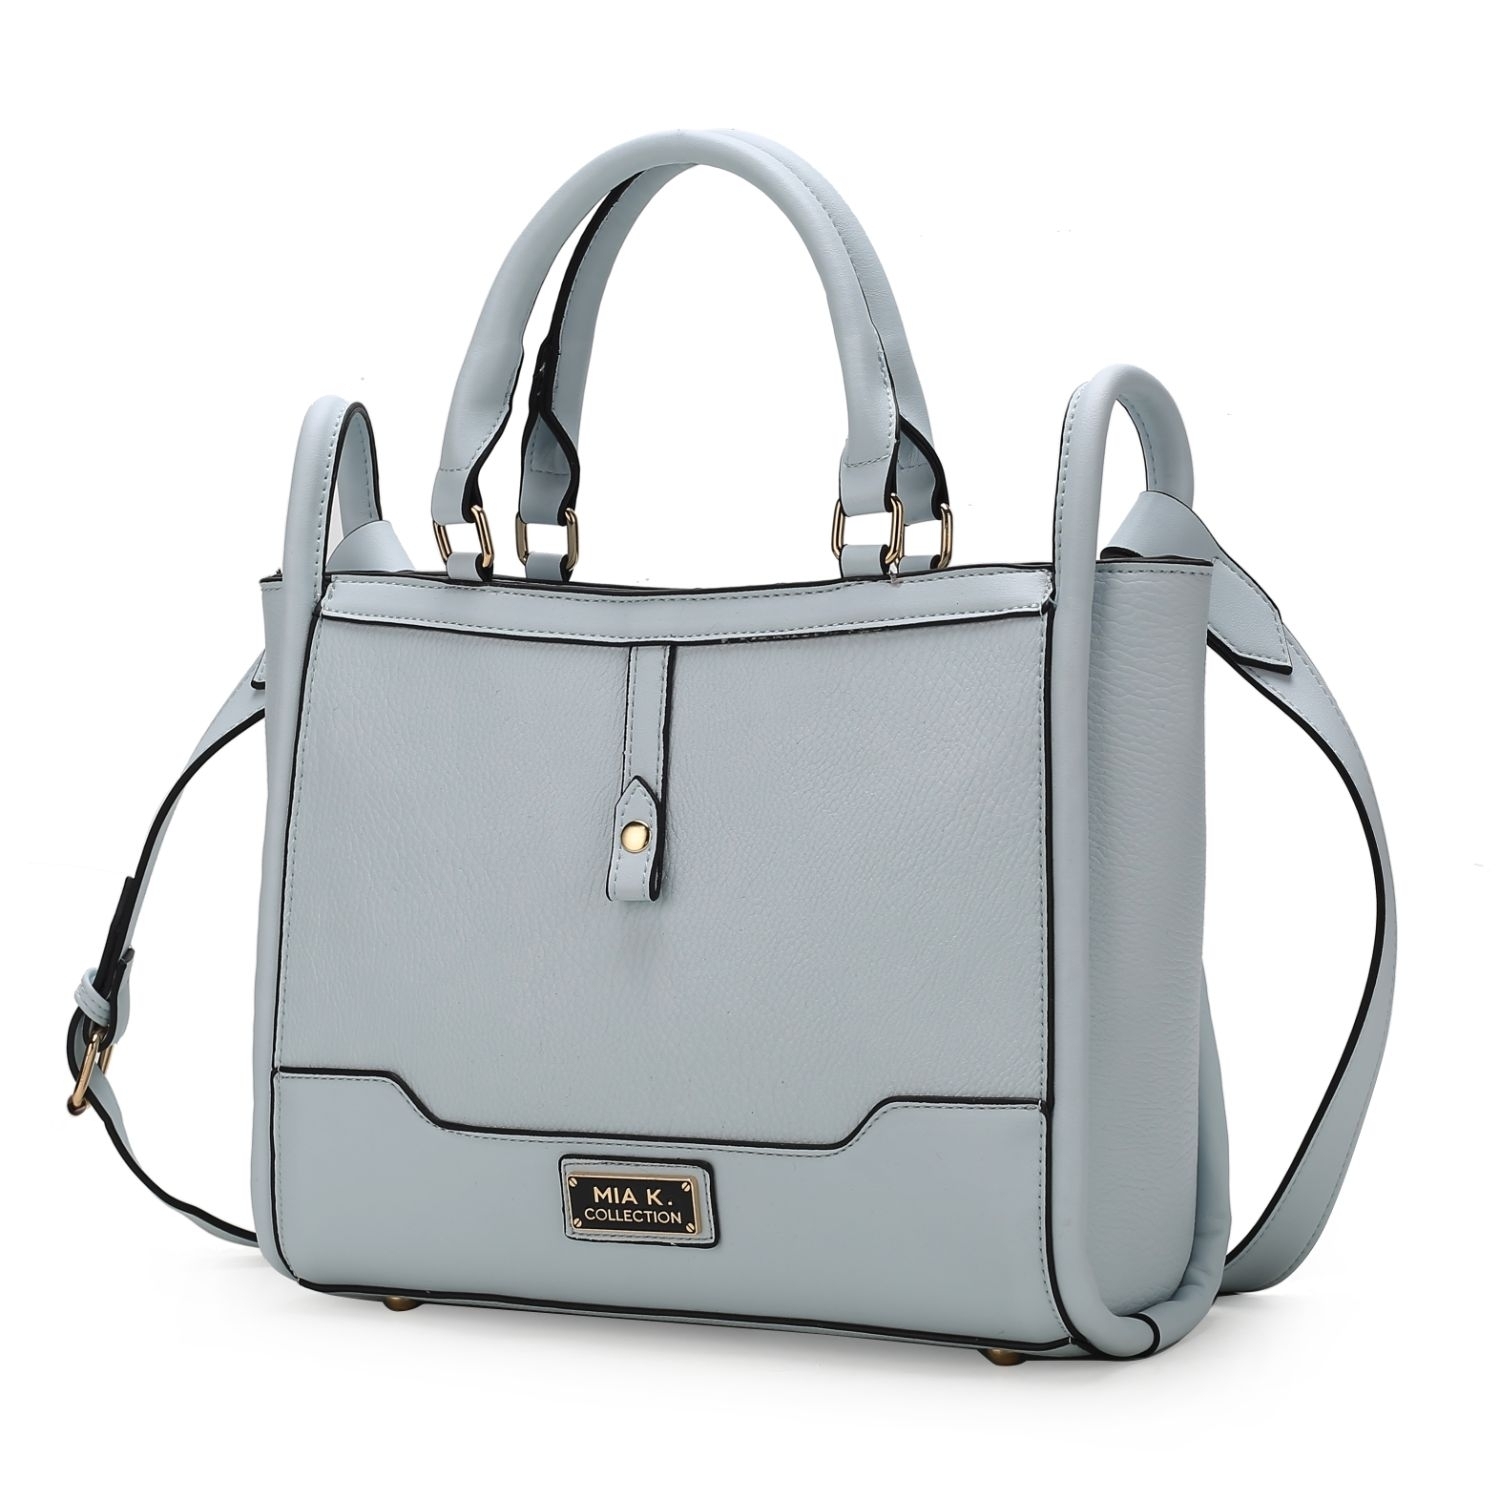 MKF Collection Melody Vegan Leather Tote By Mia K - Light Blue